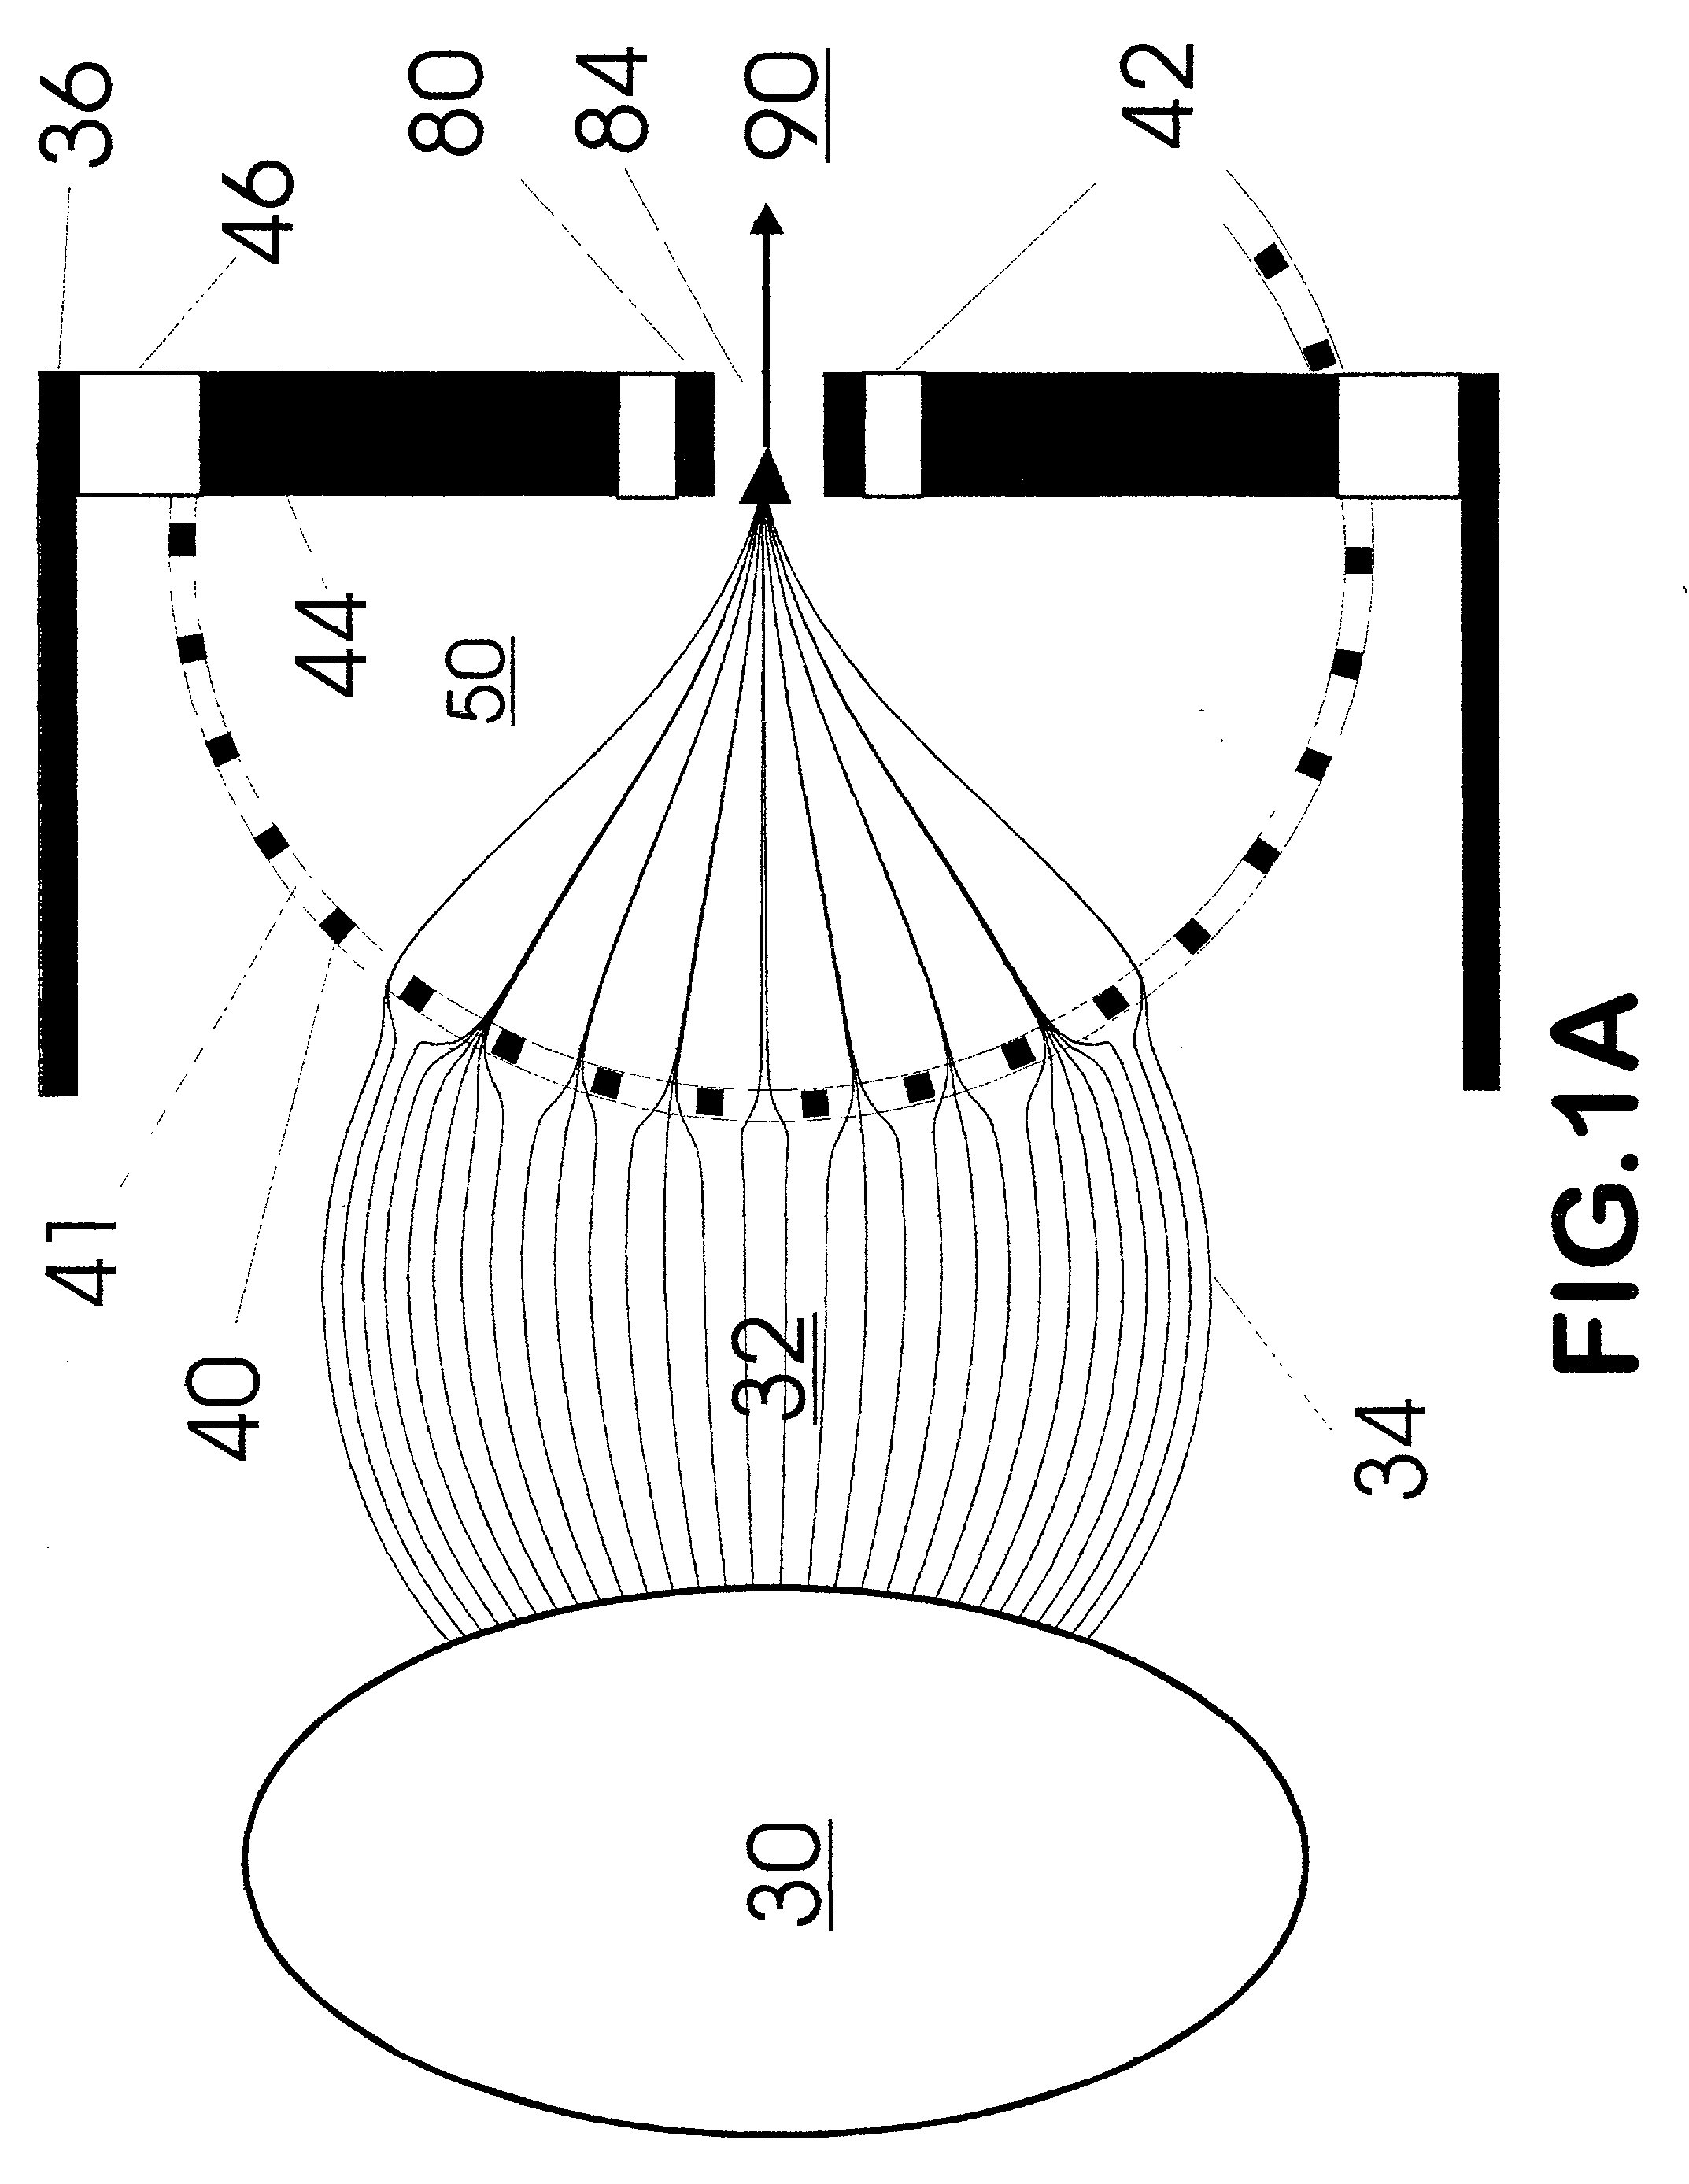 Apparatus and method for focusing ions and charged particles at atmospheric pressure